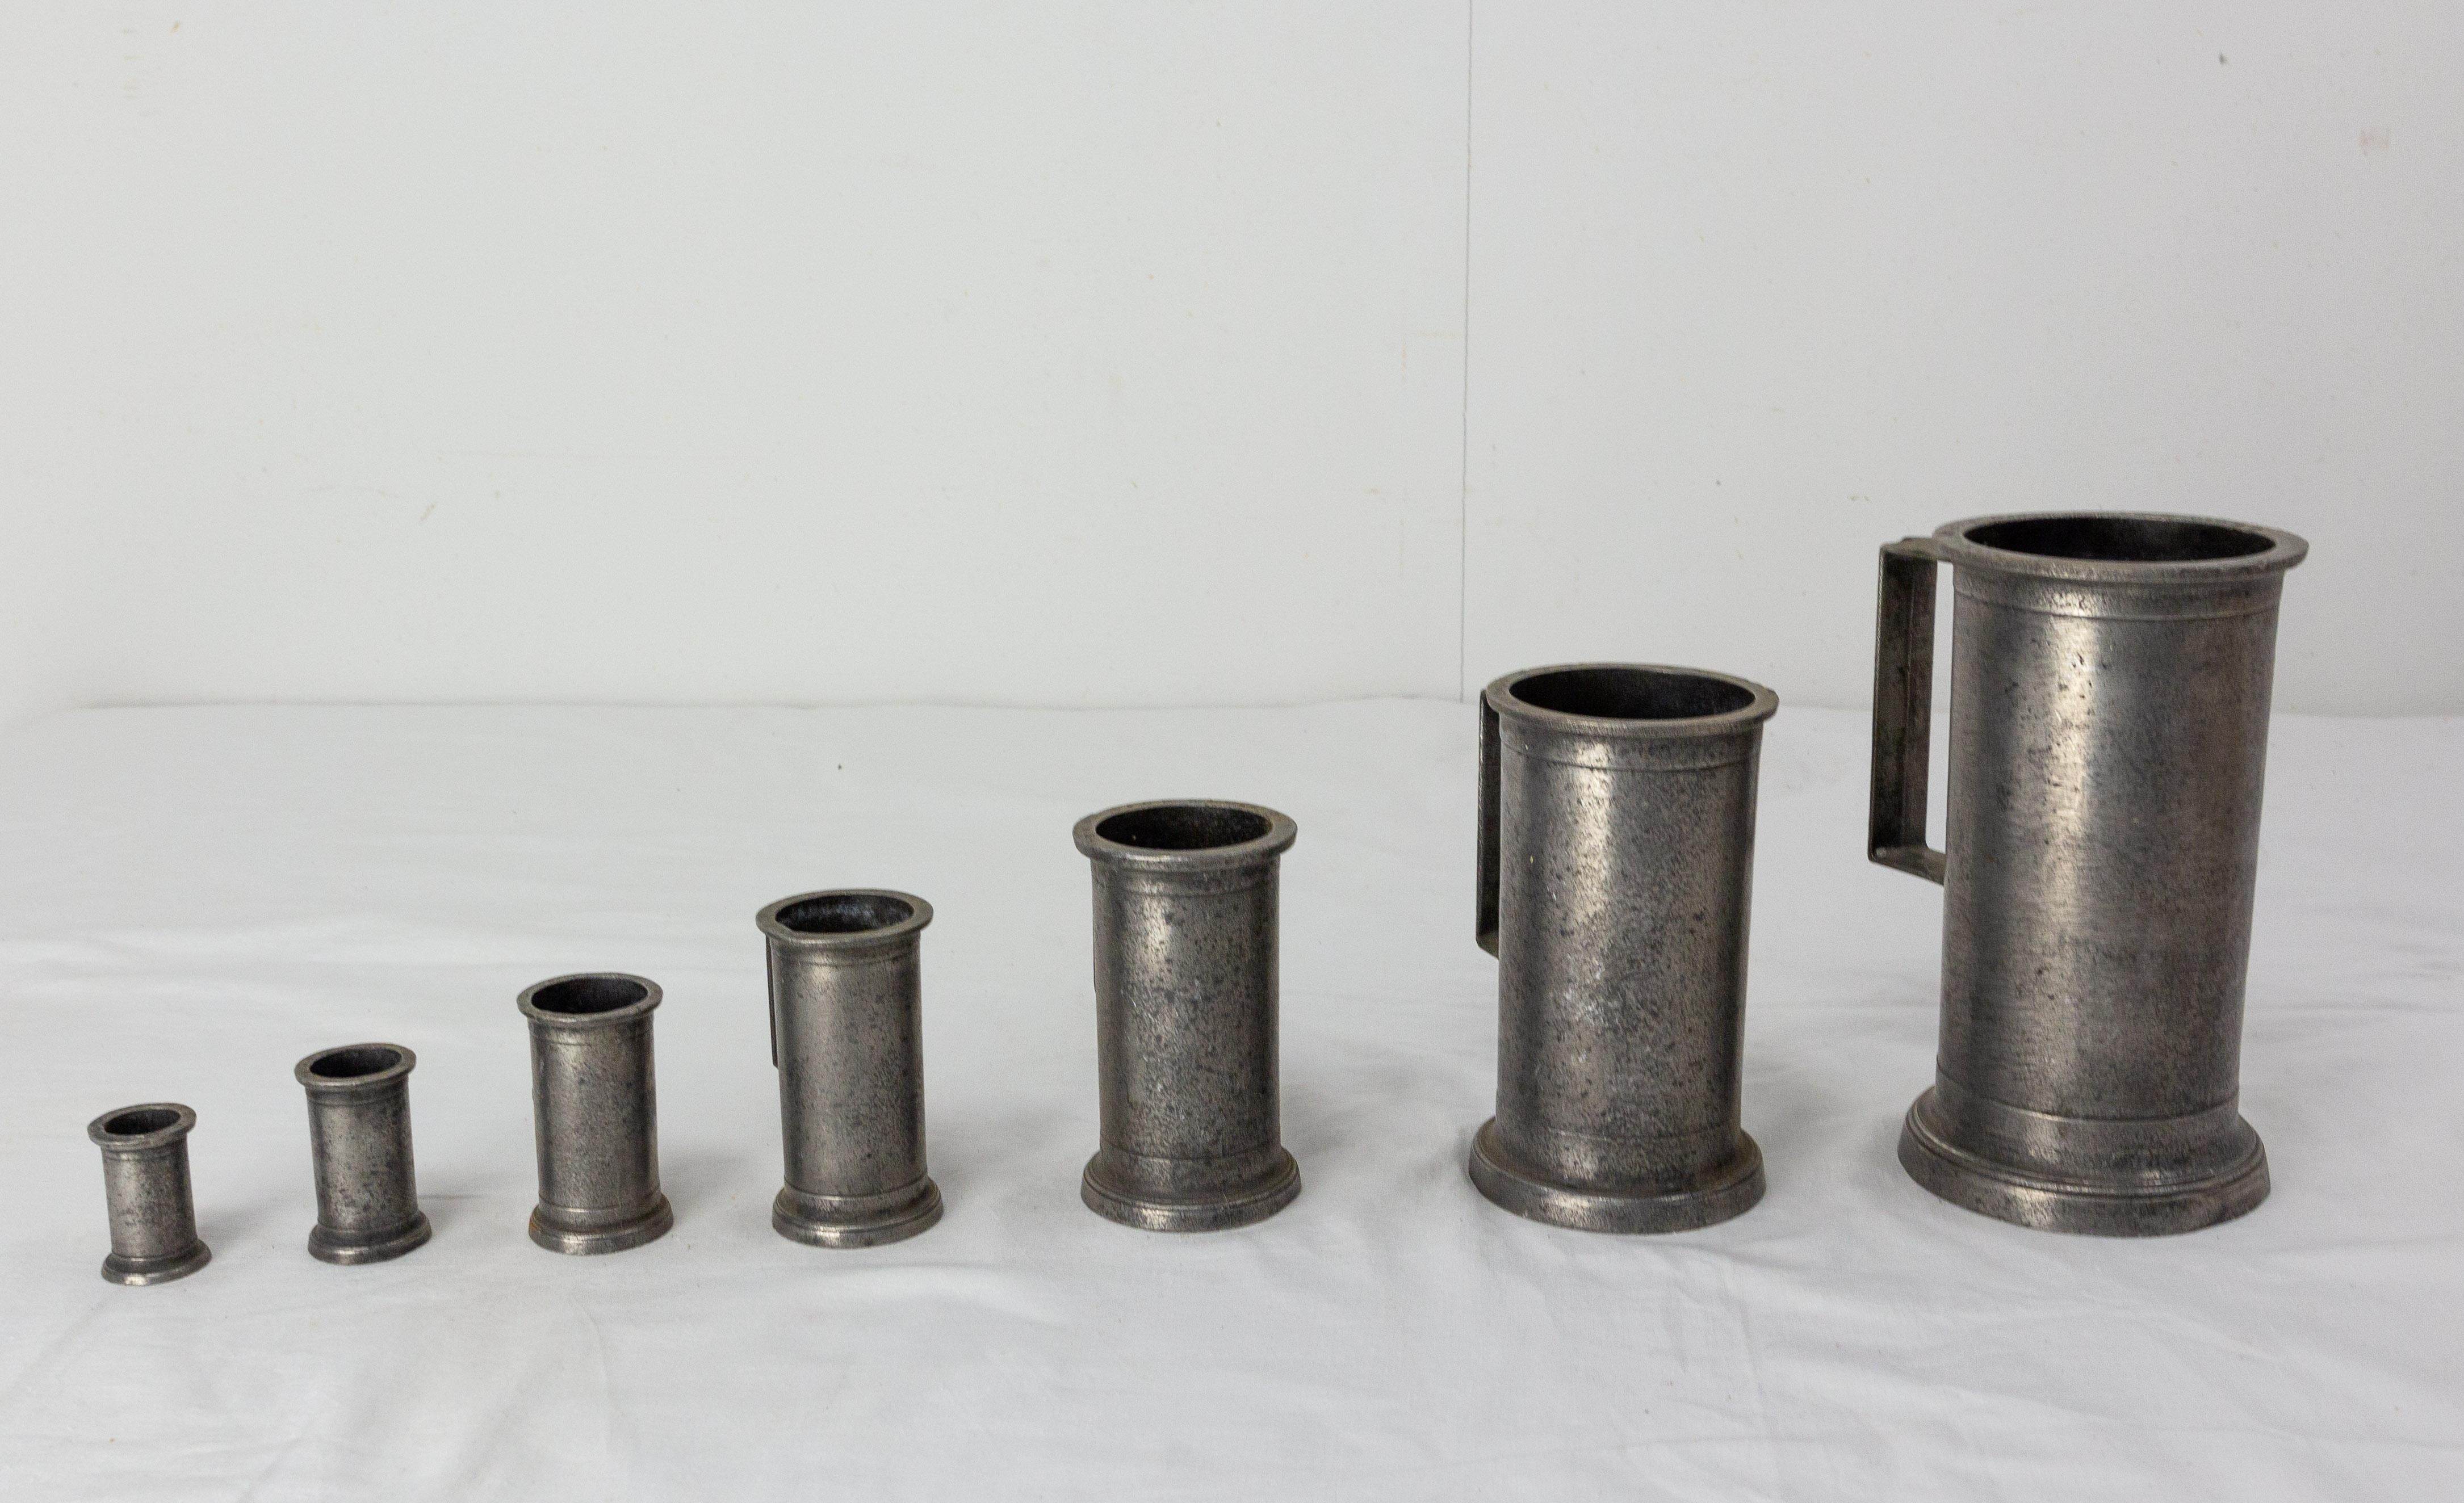 French series of tin timbales. These were used to measure quantities in a business such as a spice shop. Métier equipment
19th Century.
Good condition.

Shipping:
L 26 P12 H19 2,8 Kg.